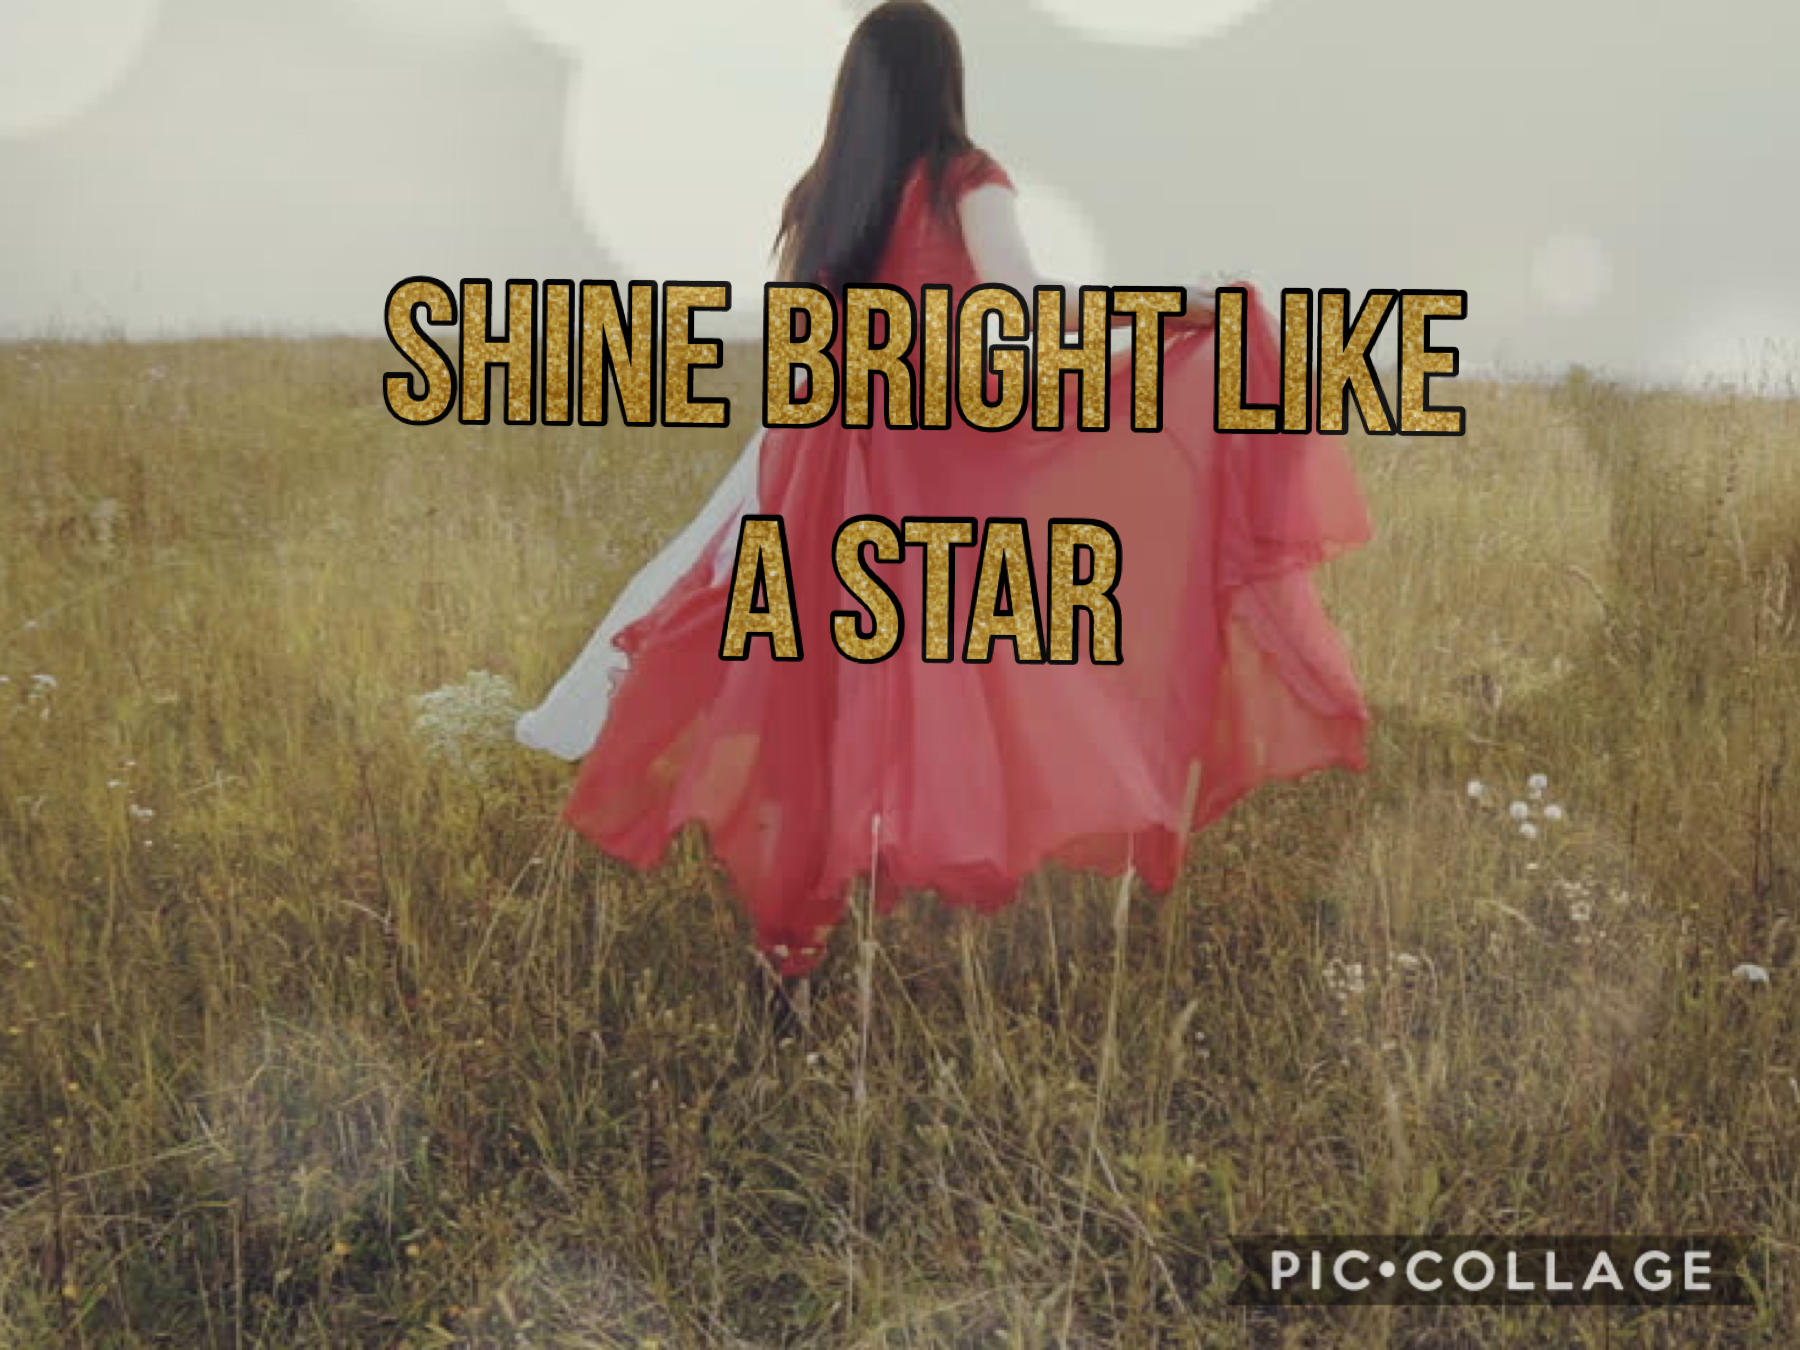 Be the star you are.